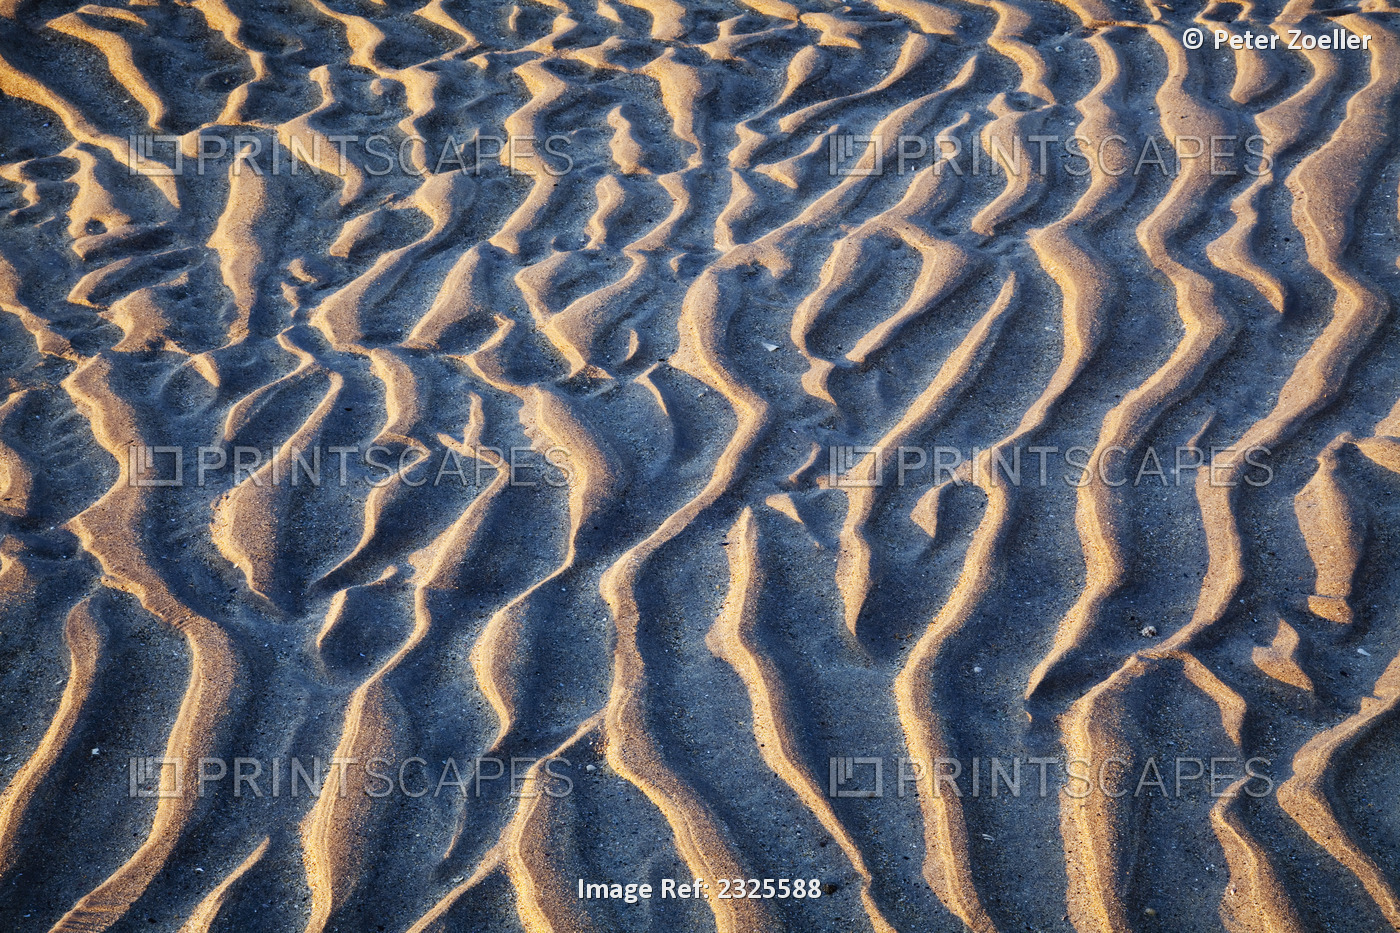 Ripples in the sand at derrynane beach;County kerry, ireland